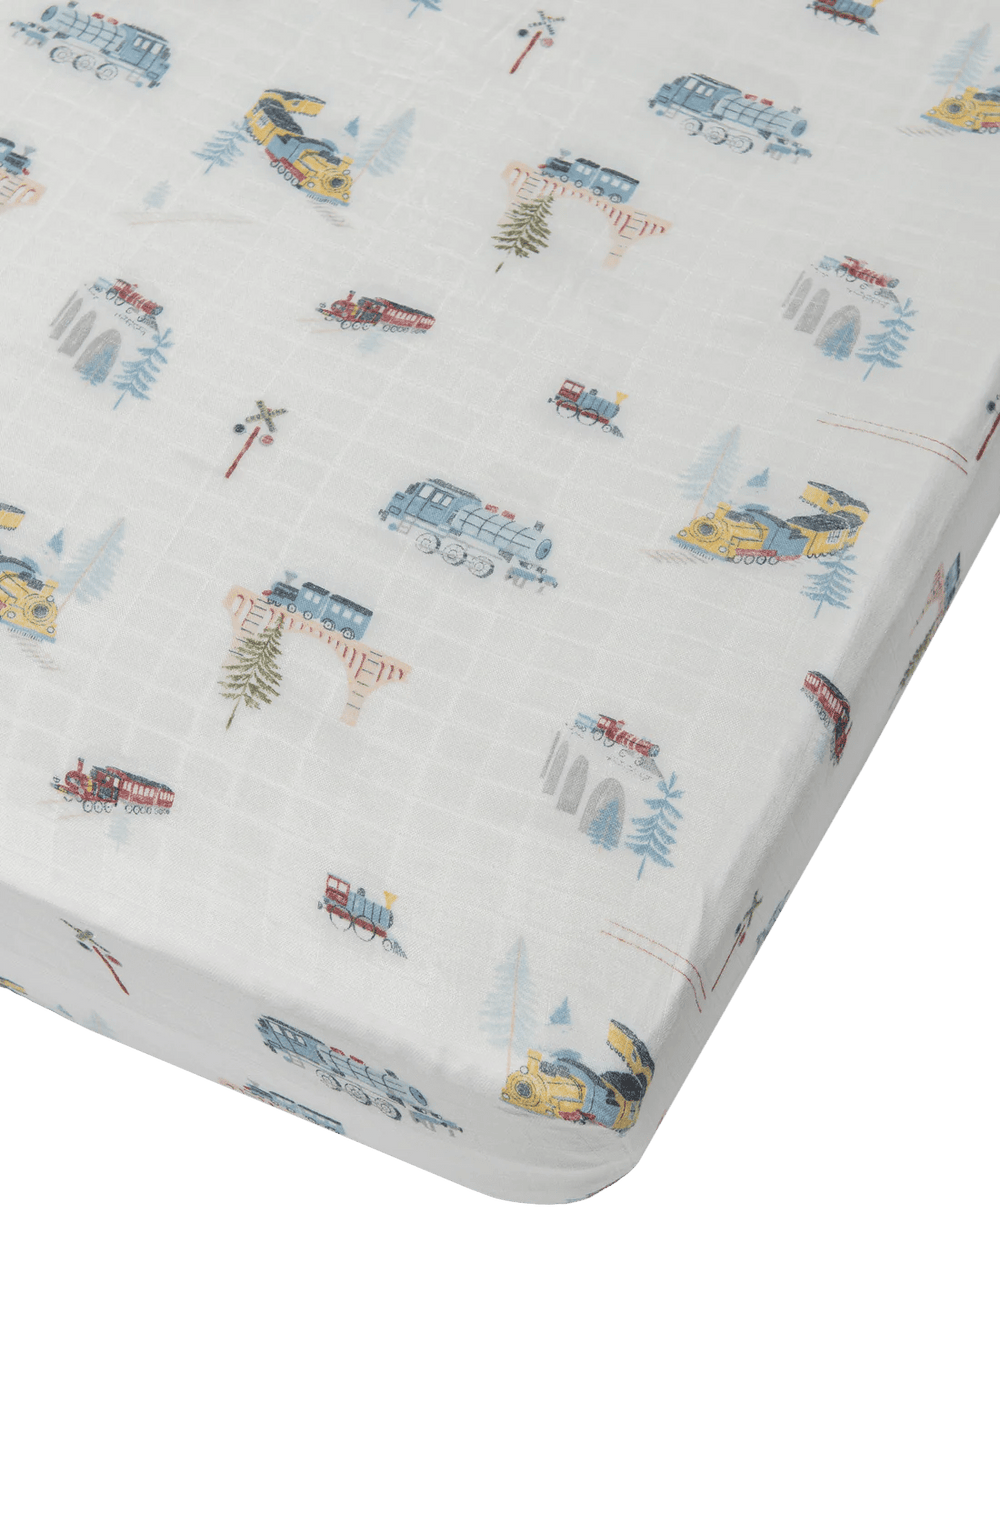 Fitted Crib Sheet - All Aboard LouLou Lollipop Lil Tulips